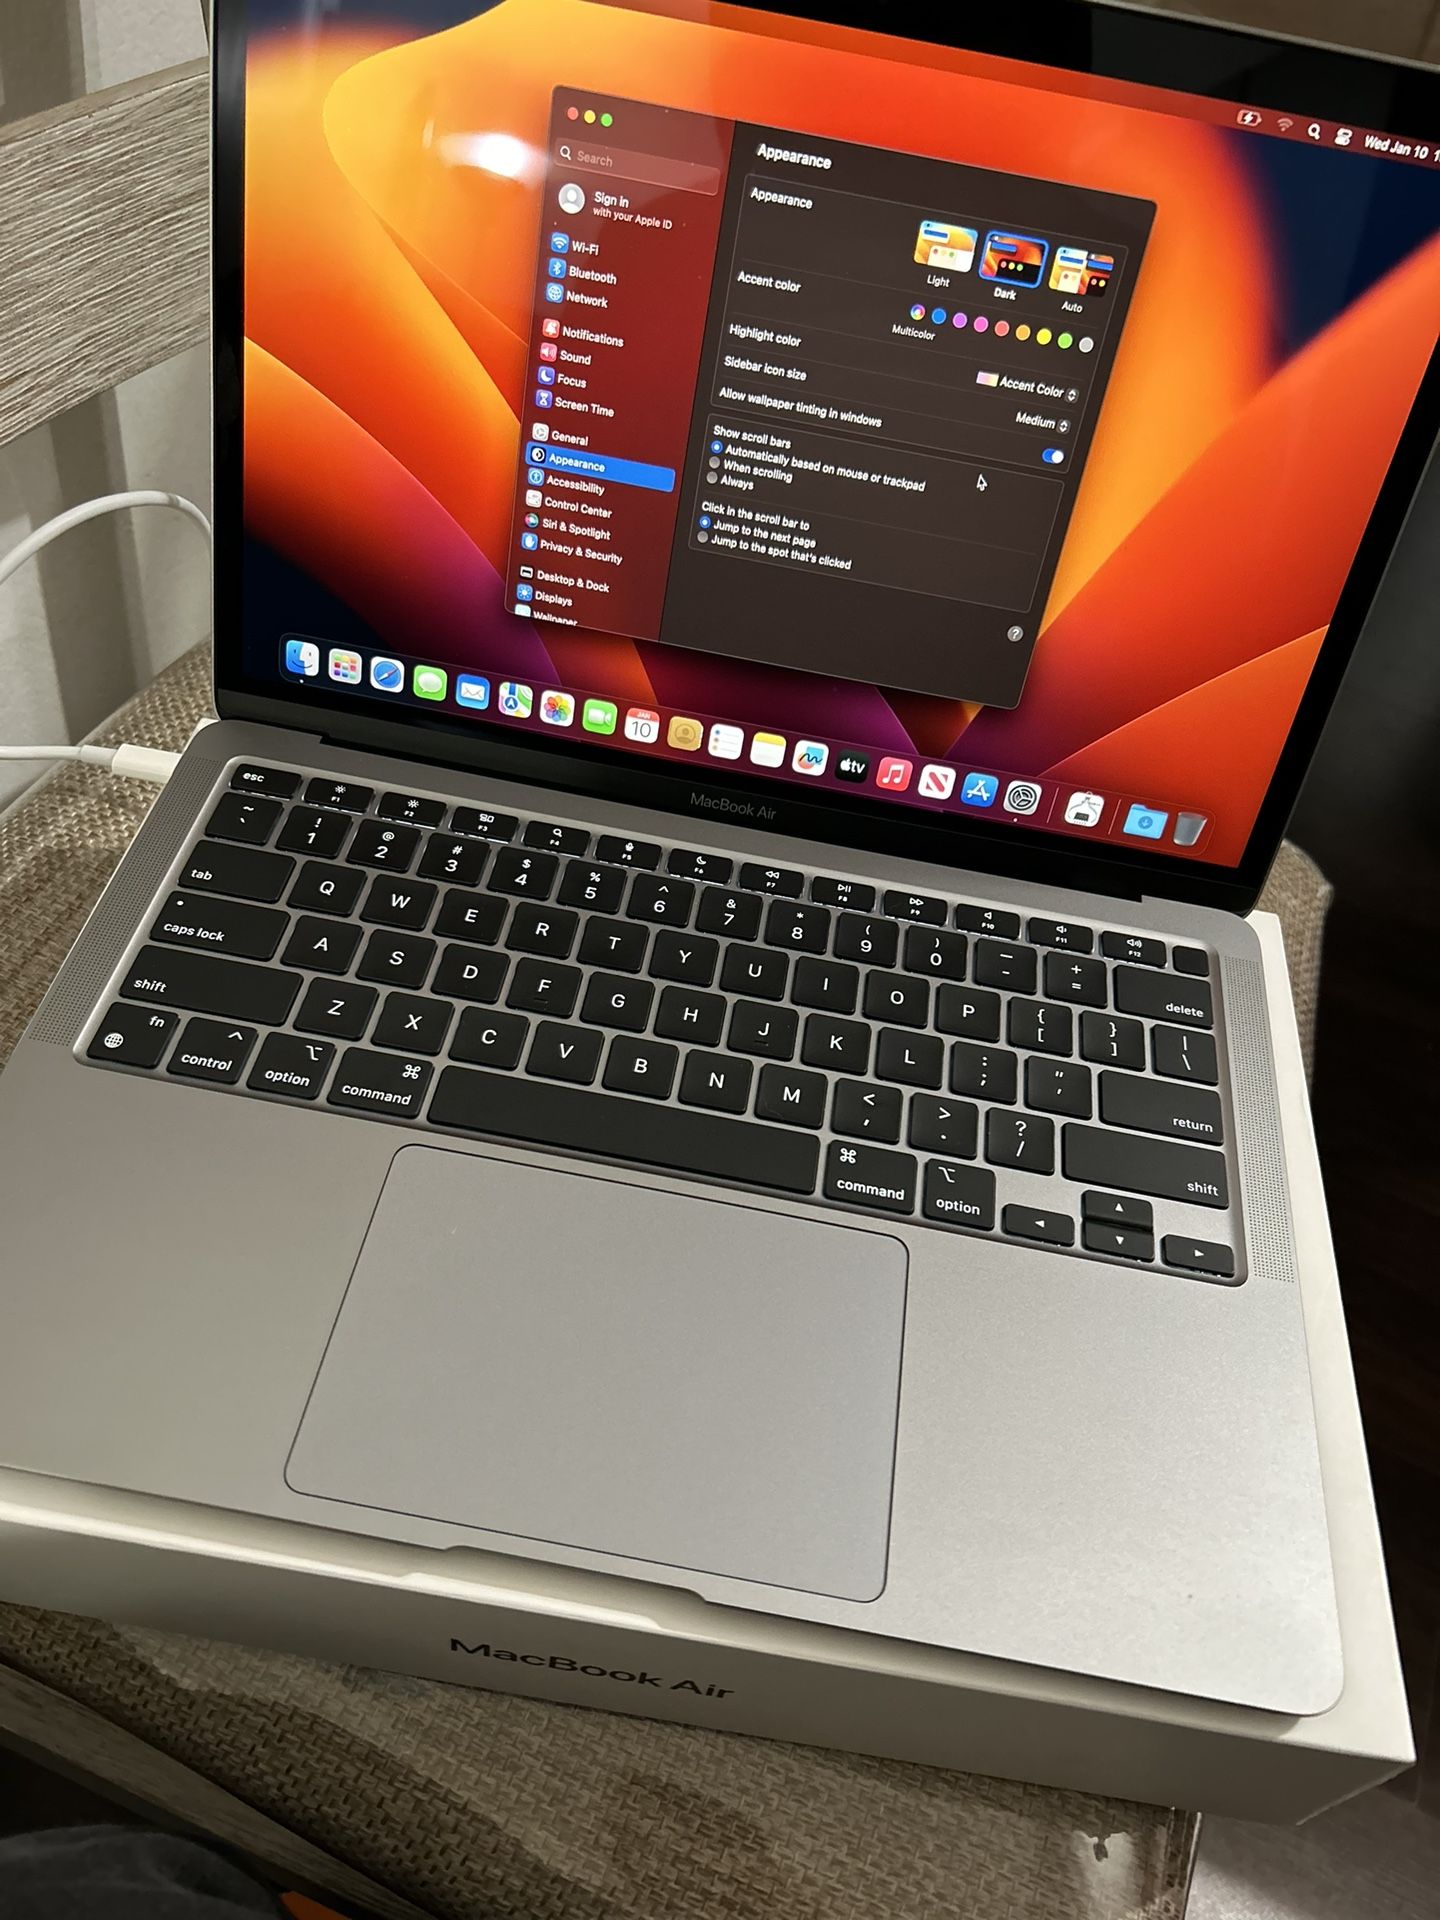 13-inch MacBook Air with Apple M1 chip (2020)